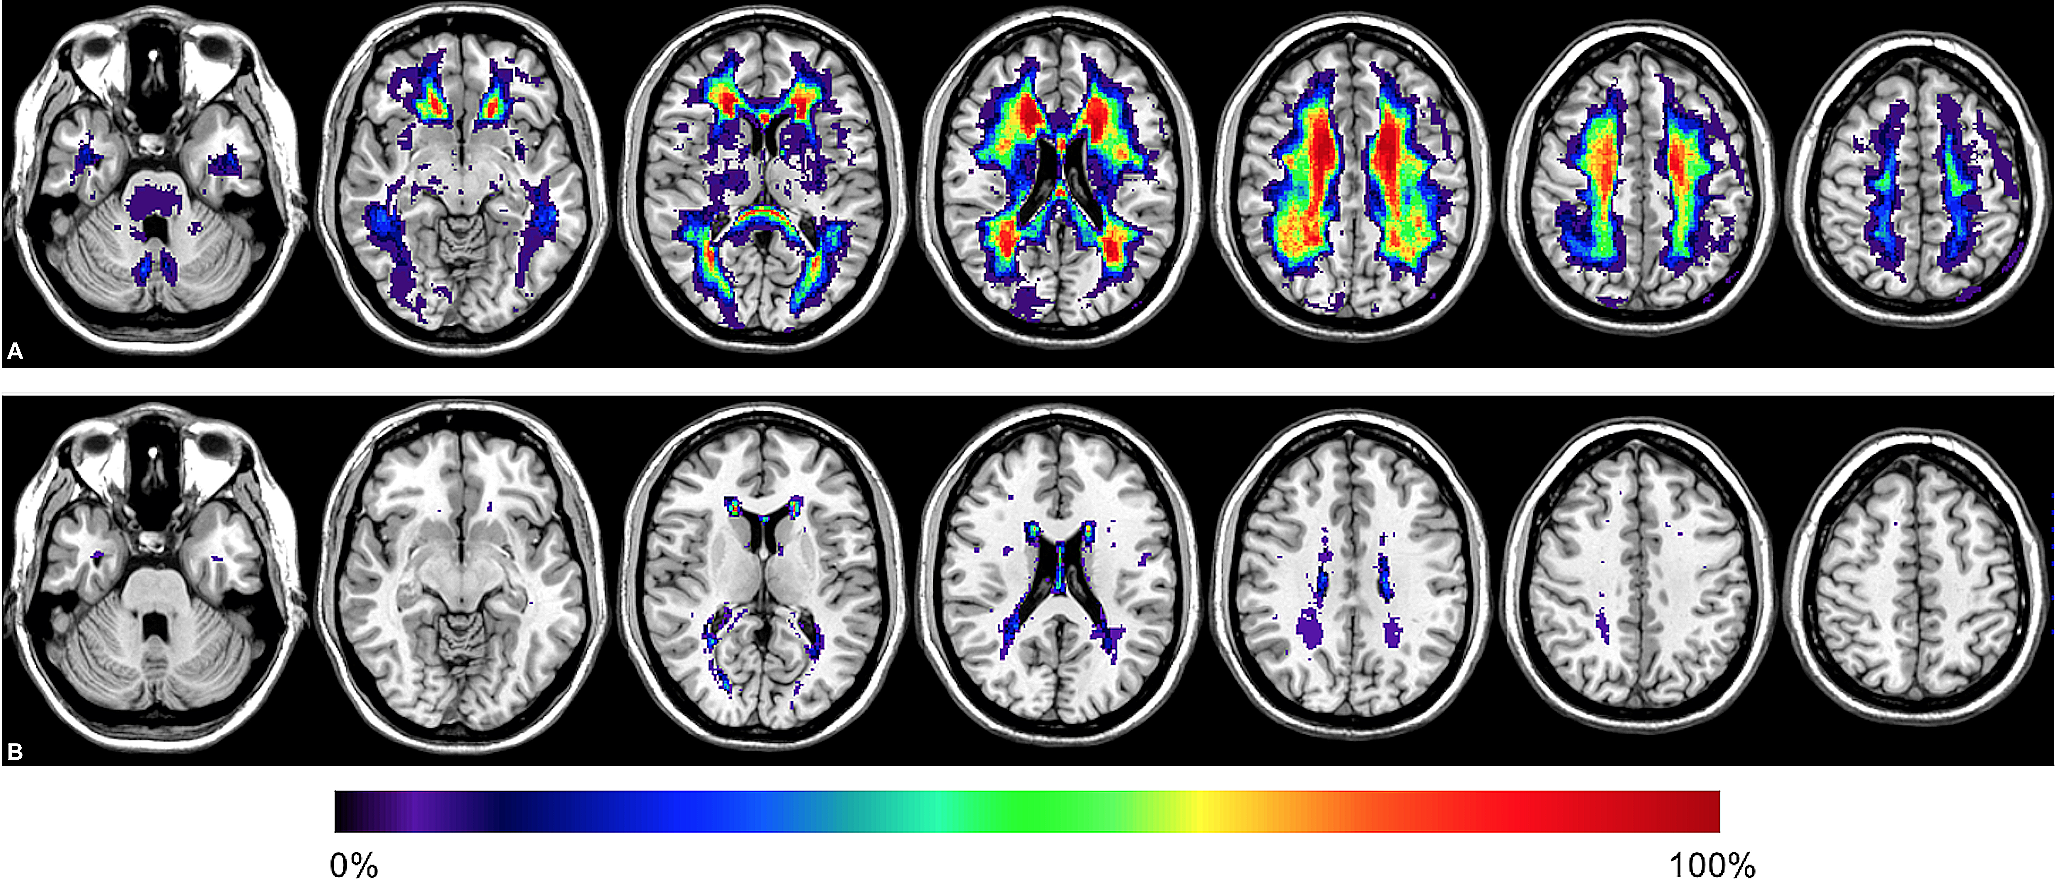 Mapping macrostructural and microstructural brain alterations in patients with neuronal intranuclear inclusion disease